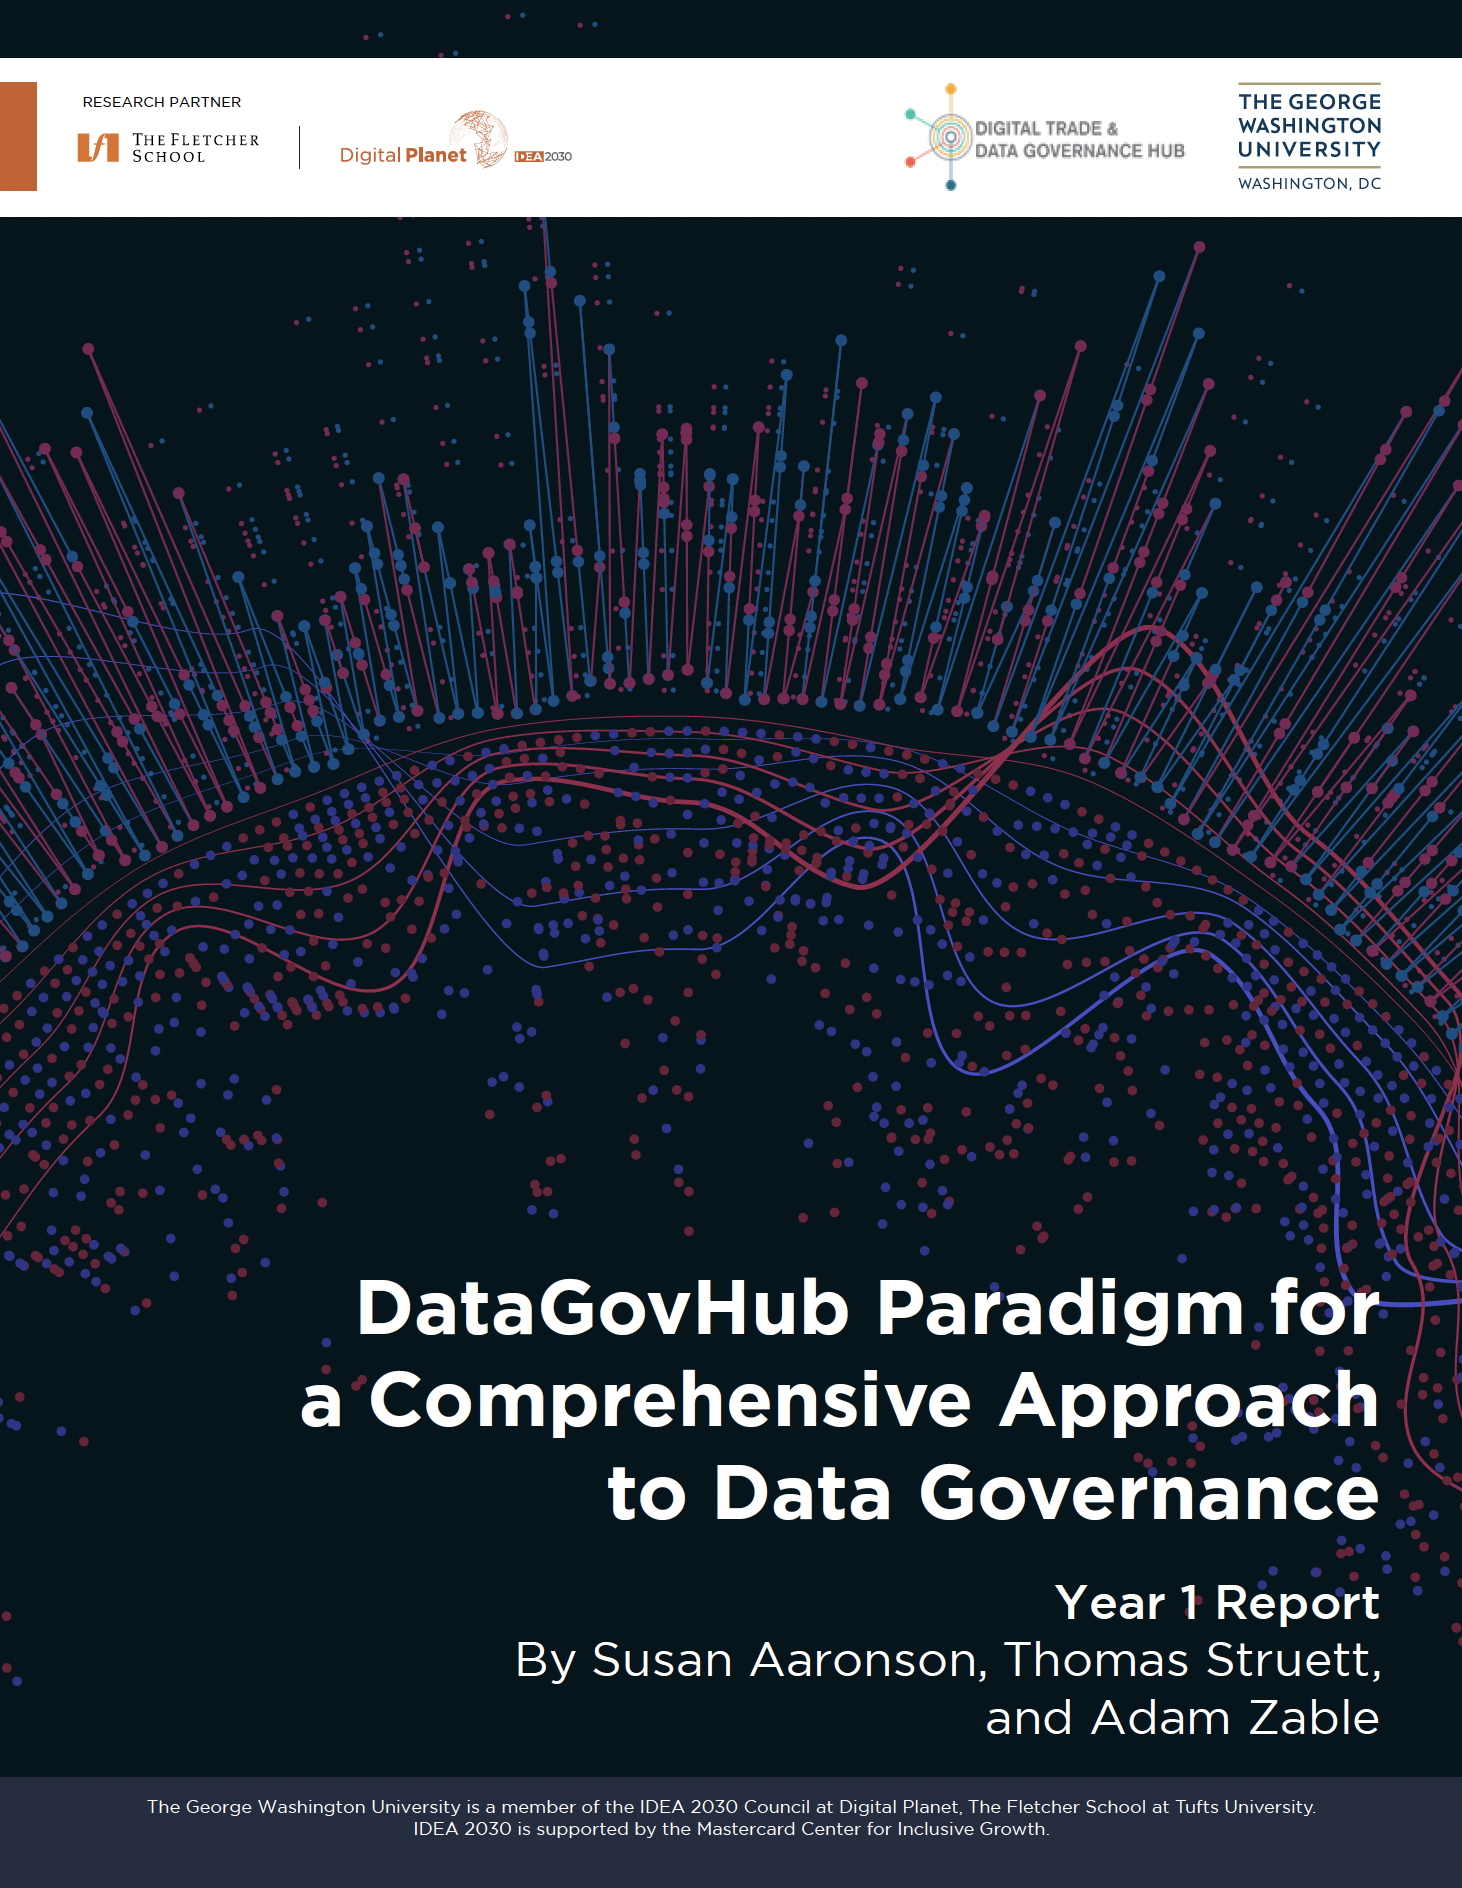 Year 1 Report - Paradigm for a Comprehensive Approach to Data Governance